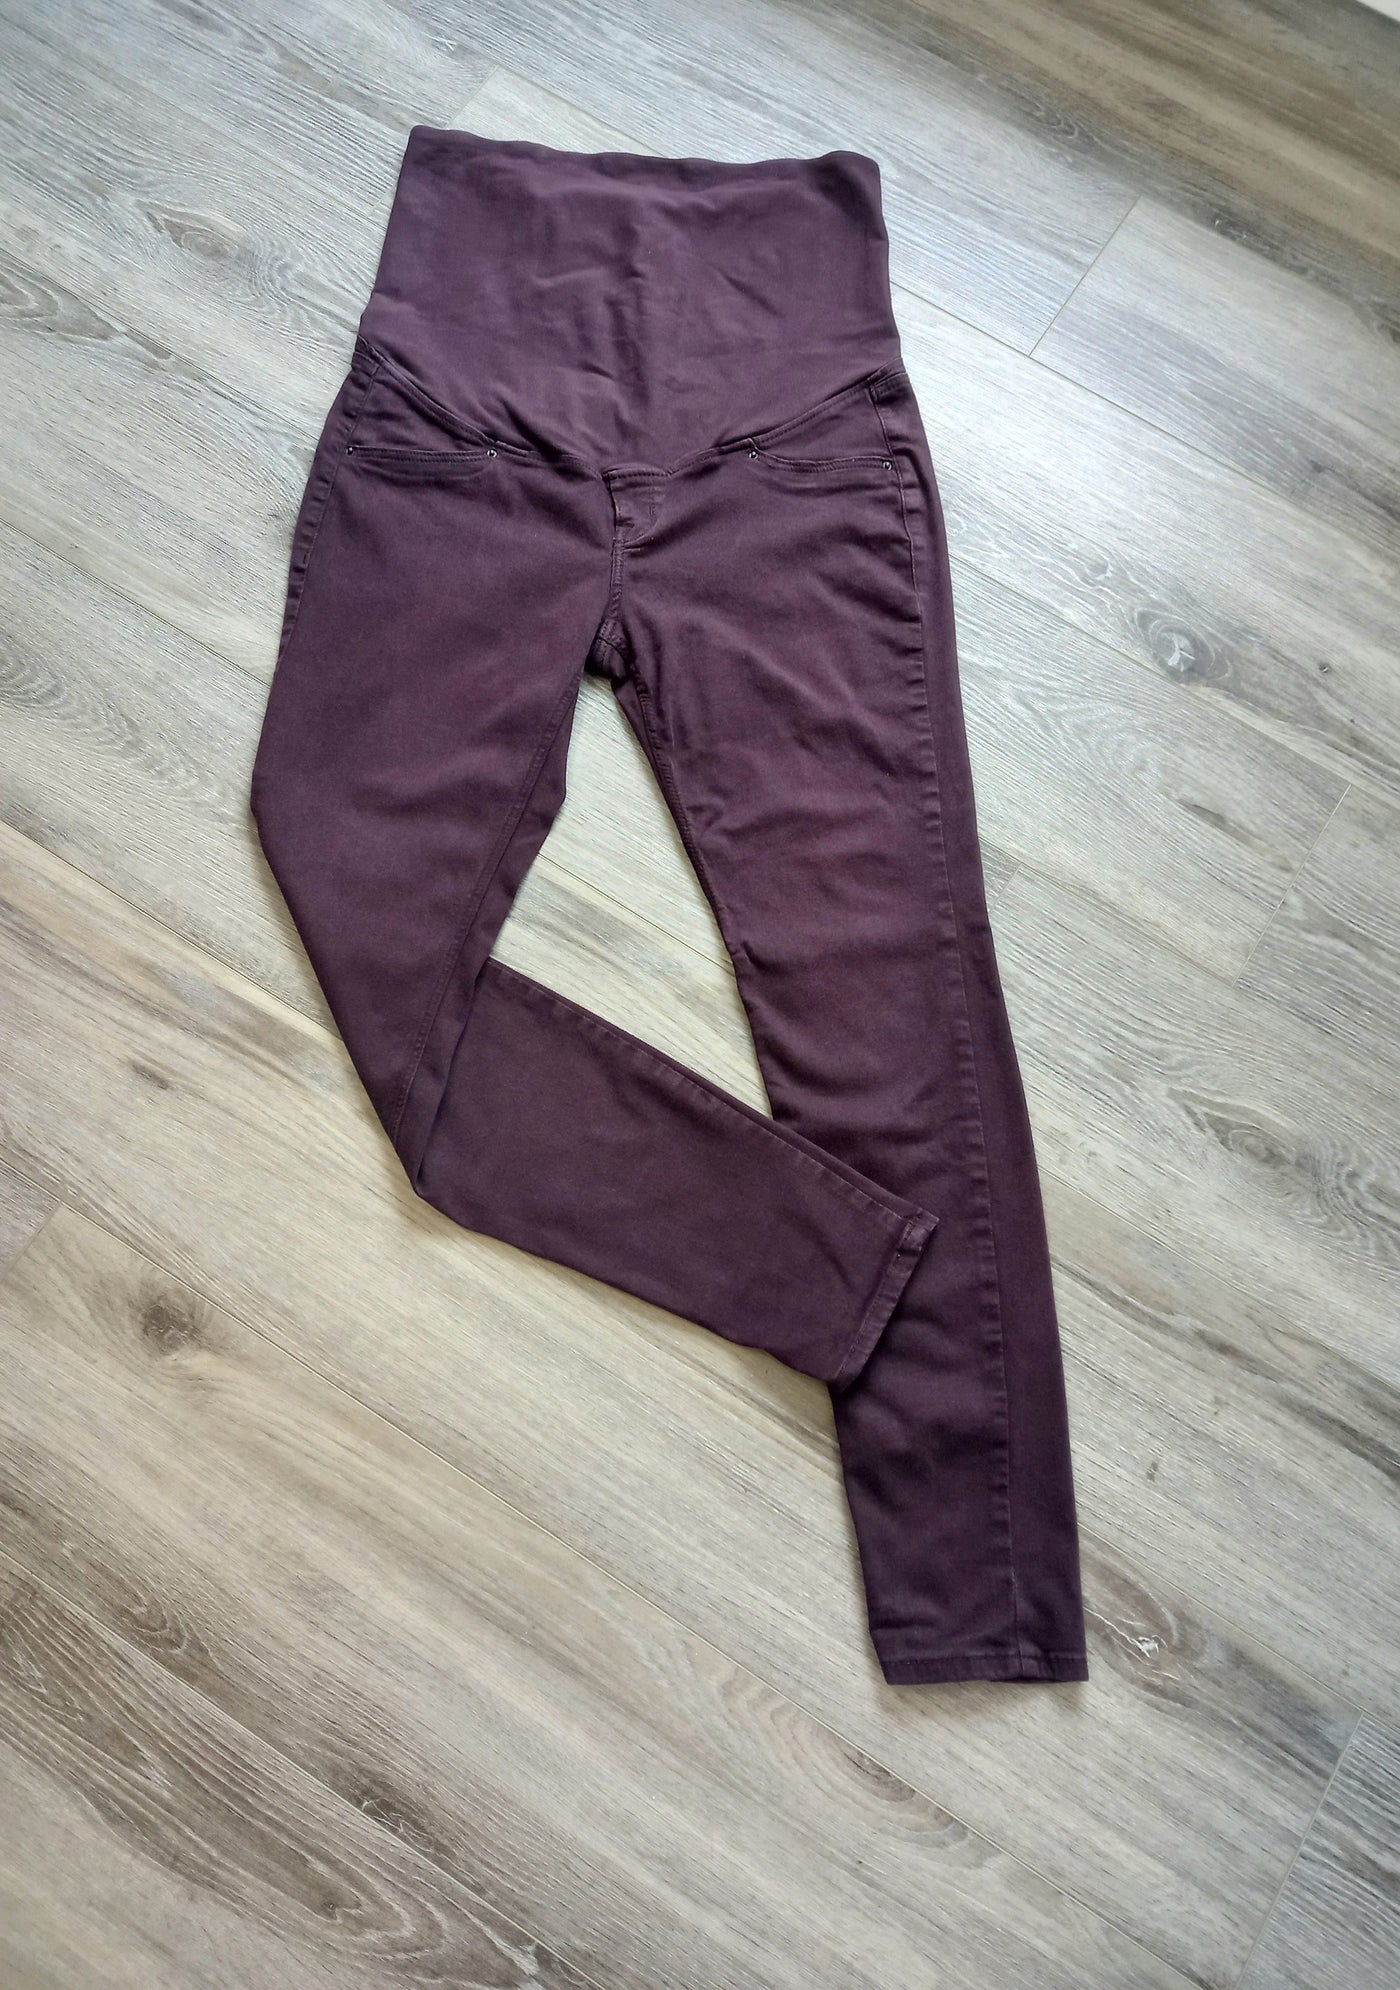 H&M Mama plum overbump jeggings - Size EUR 44 (Approx UK 12)